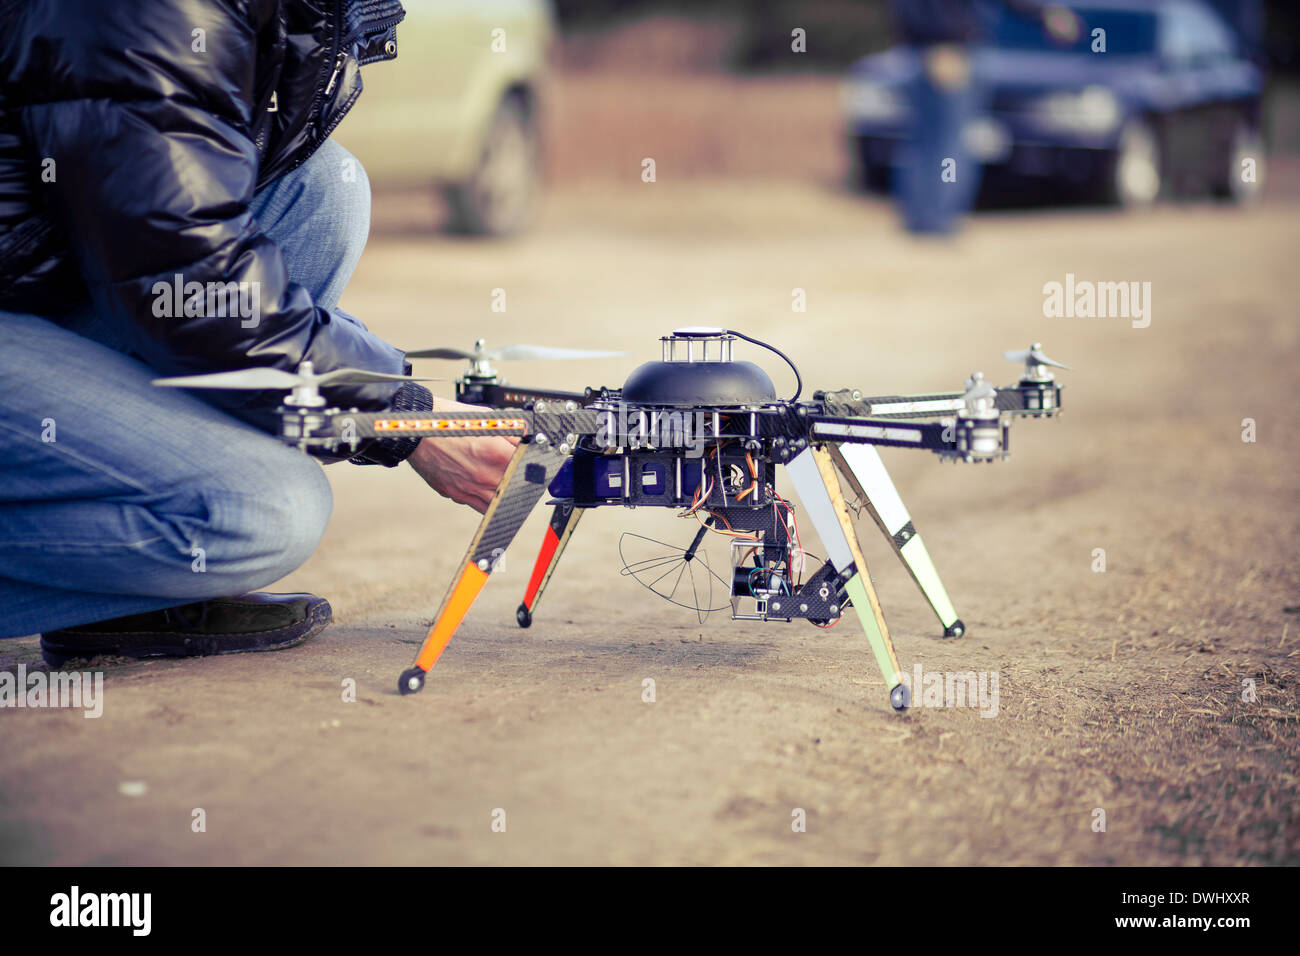 Quadrocopter drone ready to takeoff Stock Photo